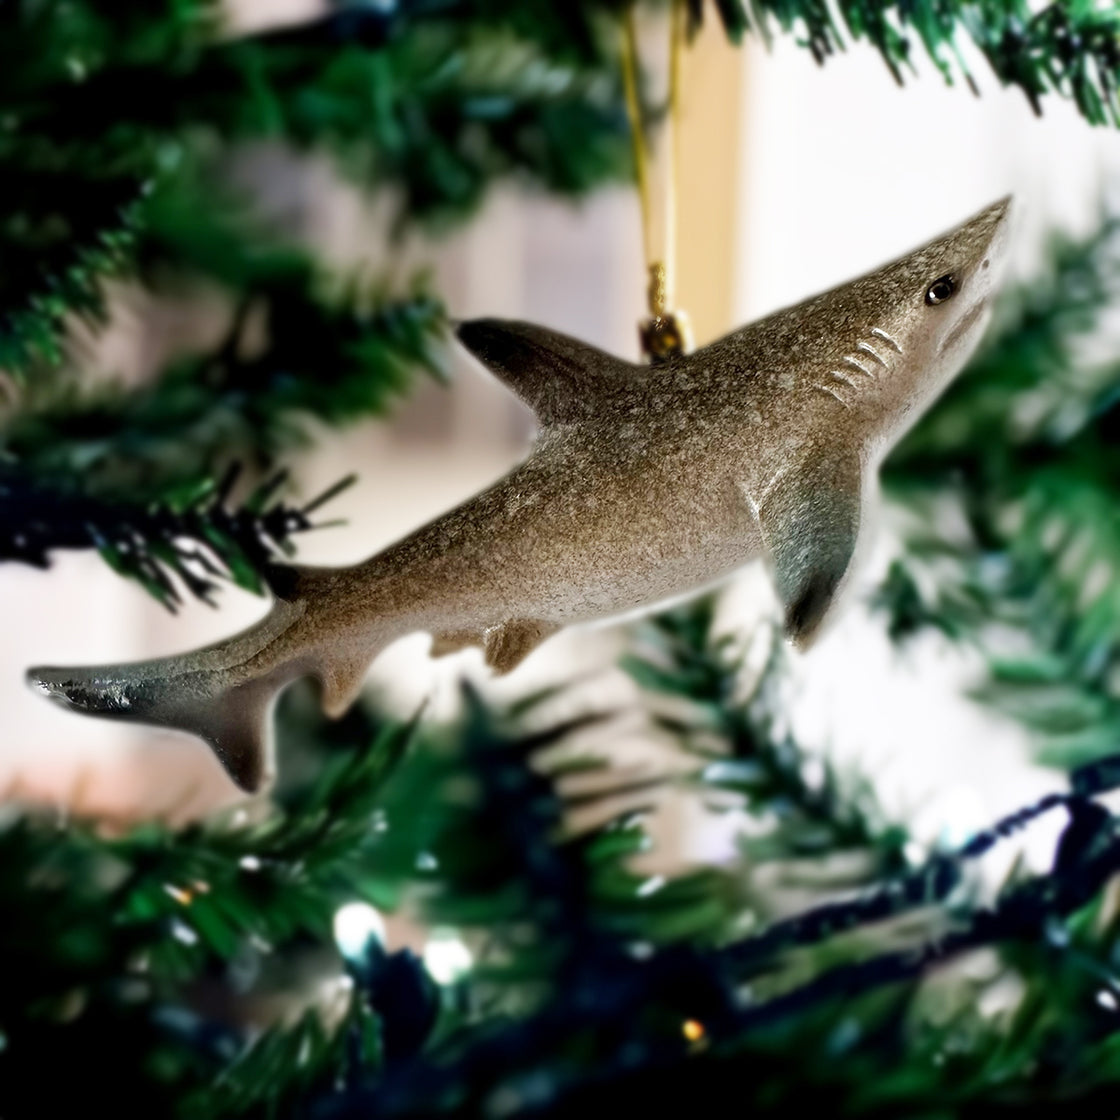 A rengöra shark ornament suspended from a Christmas tree, captured from a side angle, with a gently blurred background